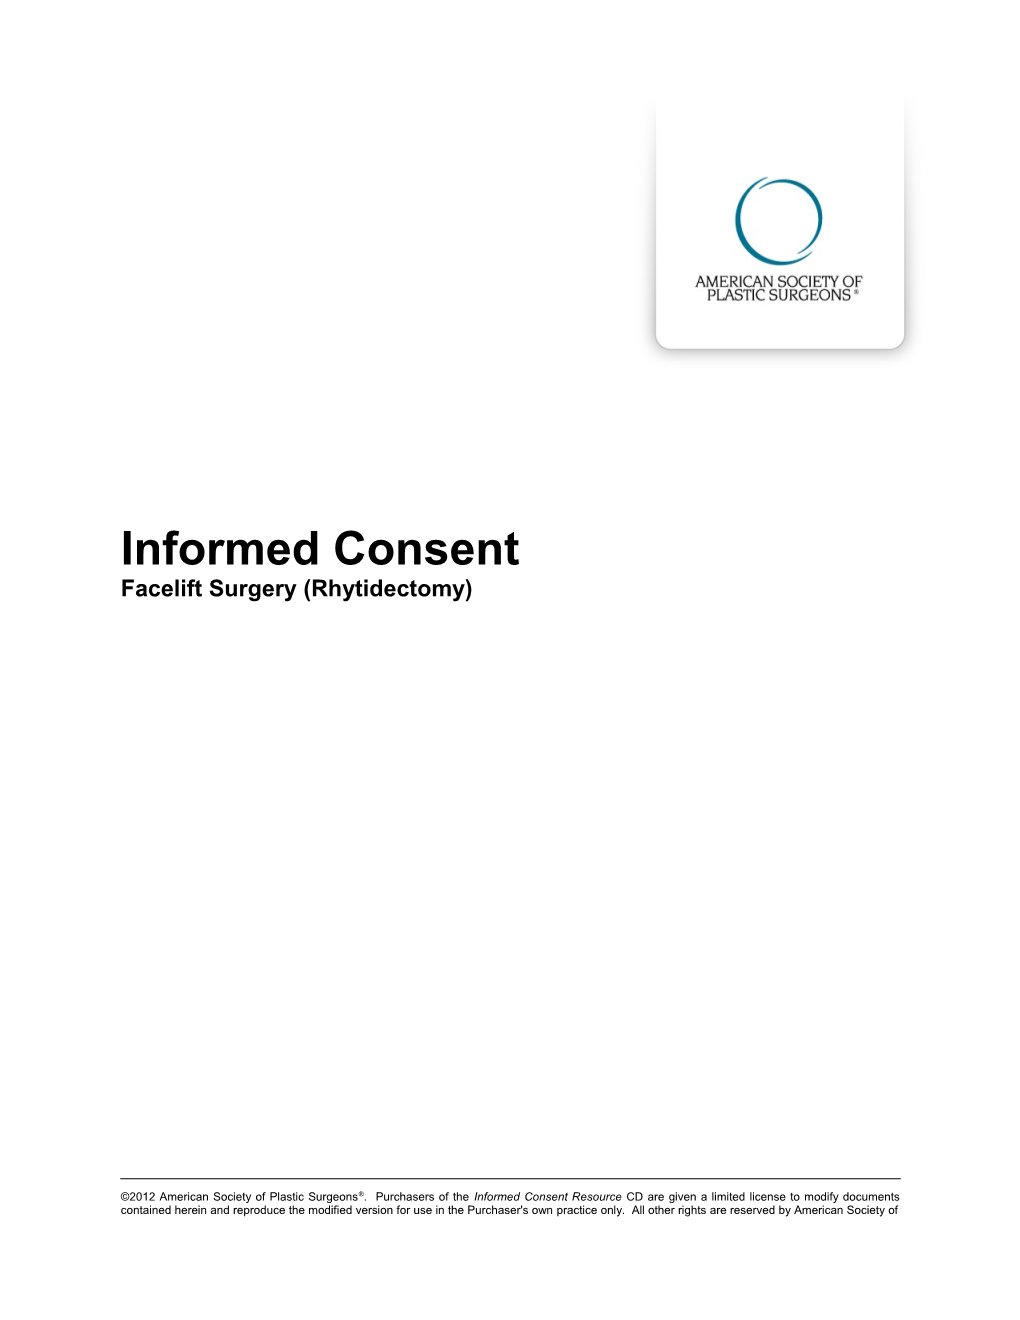 Informed Consent s1